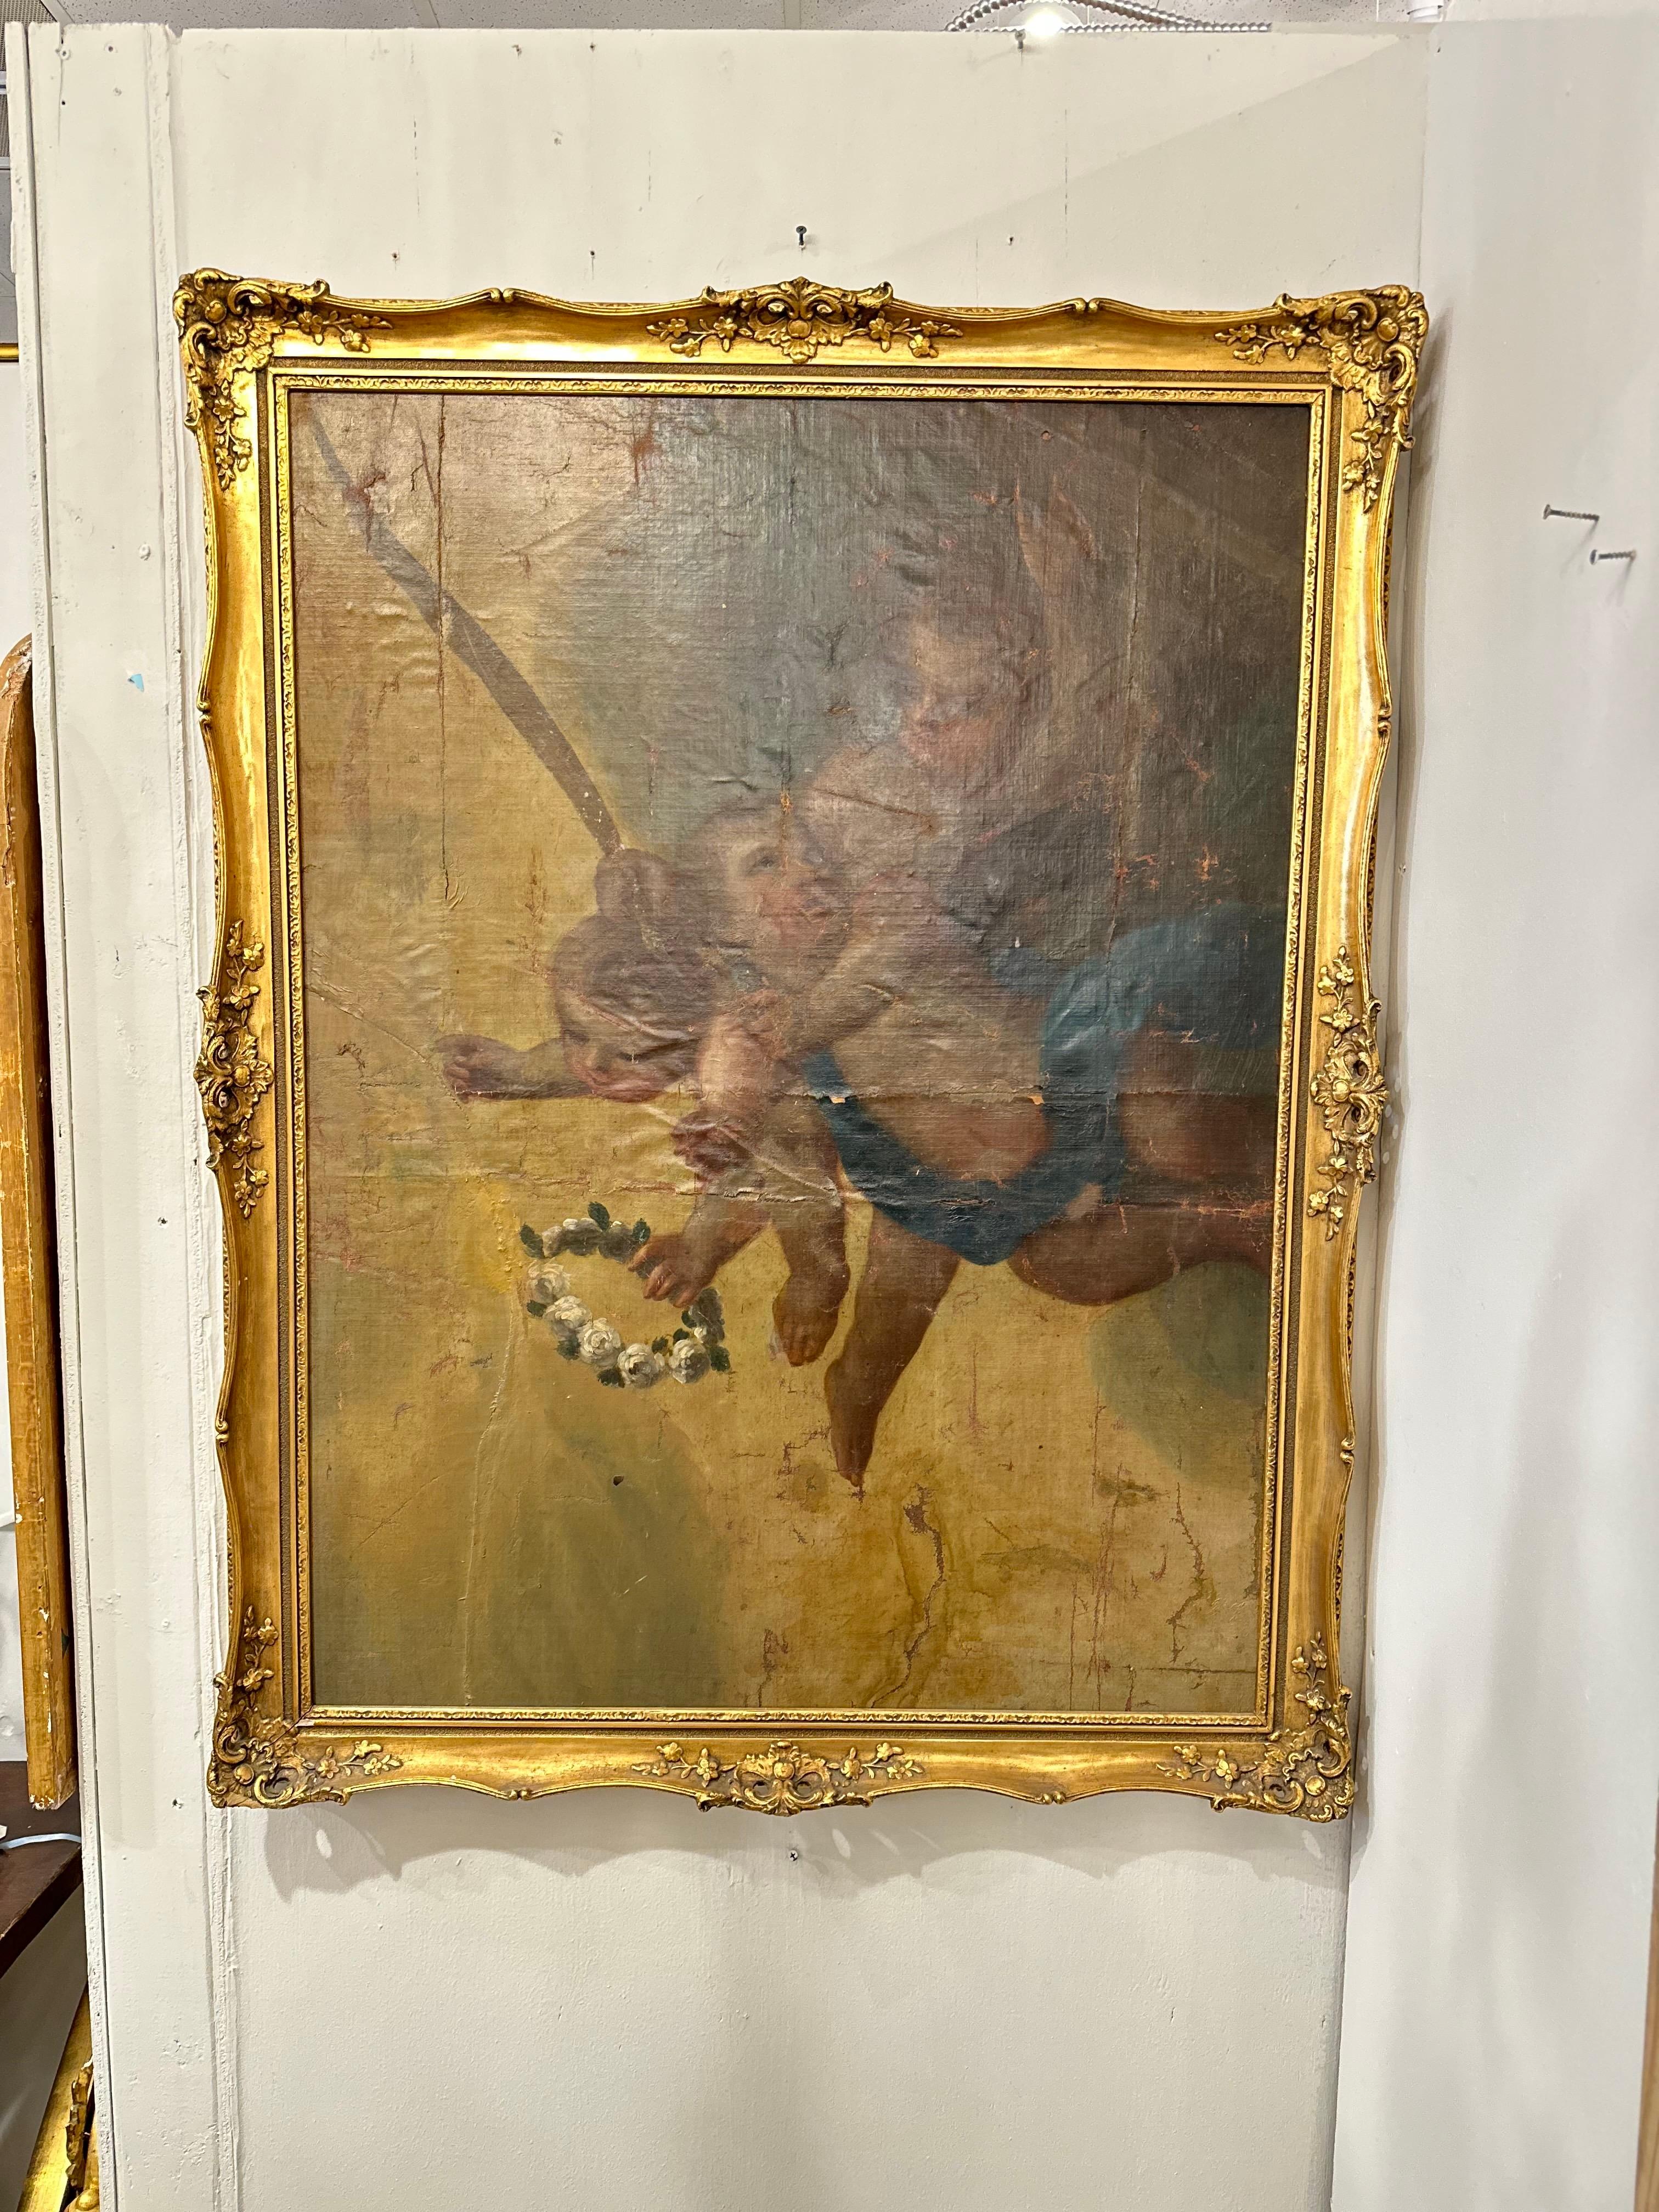 The 19th Century Painting from Mexico in Gilt Frame is a captivating work of art that showcases the rich artistic tradition of the region. Set within an ornate gilt frame, the painting depicts three cupids together, each adorned with delicate wings